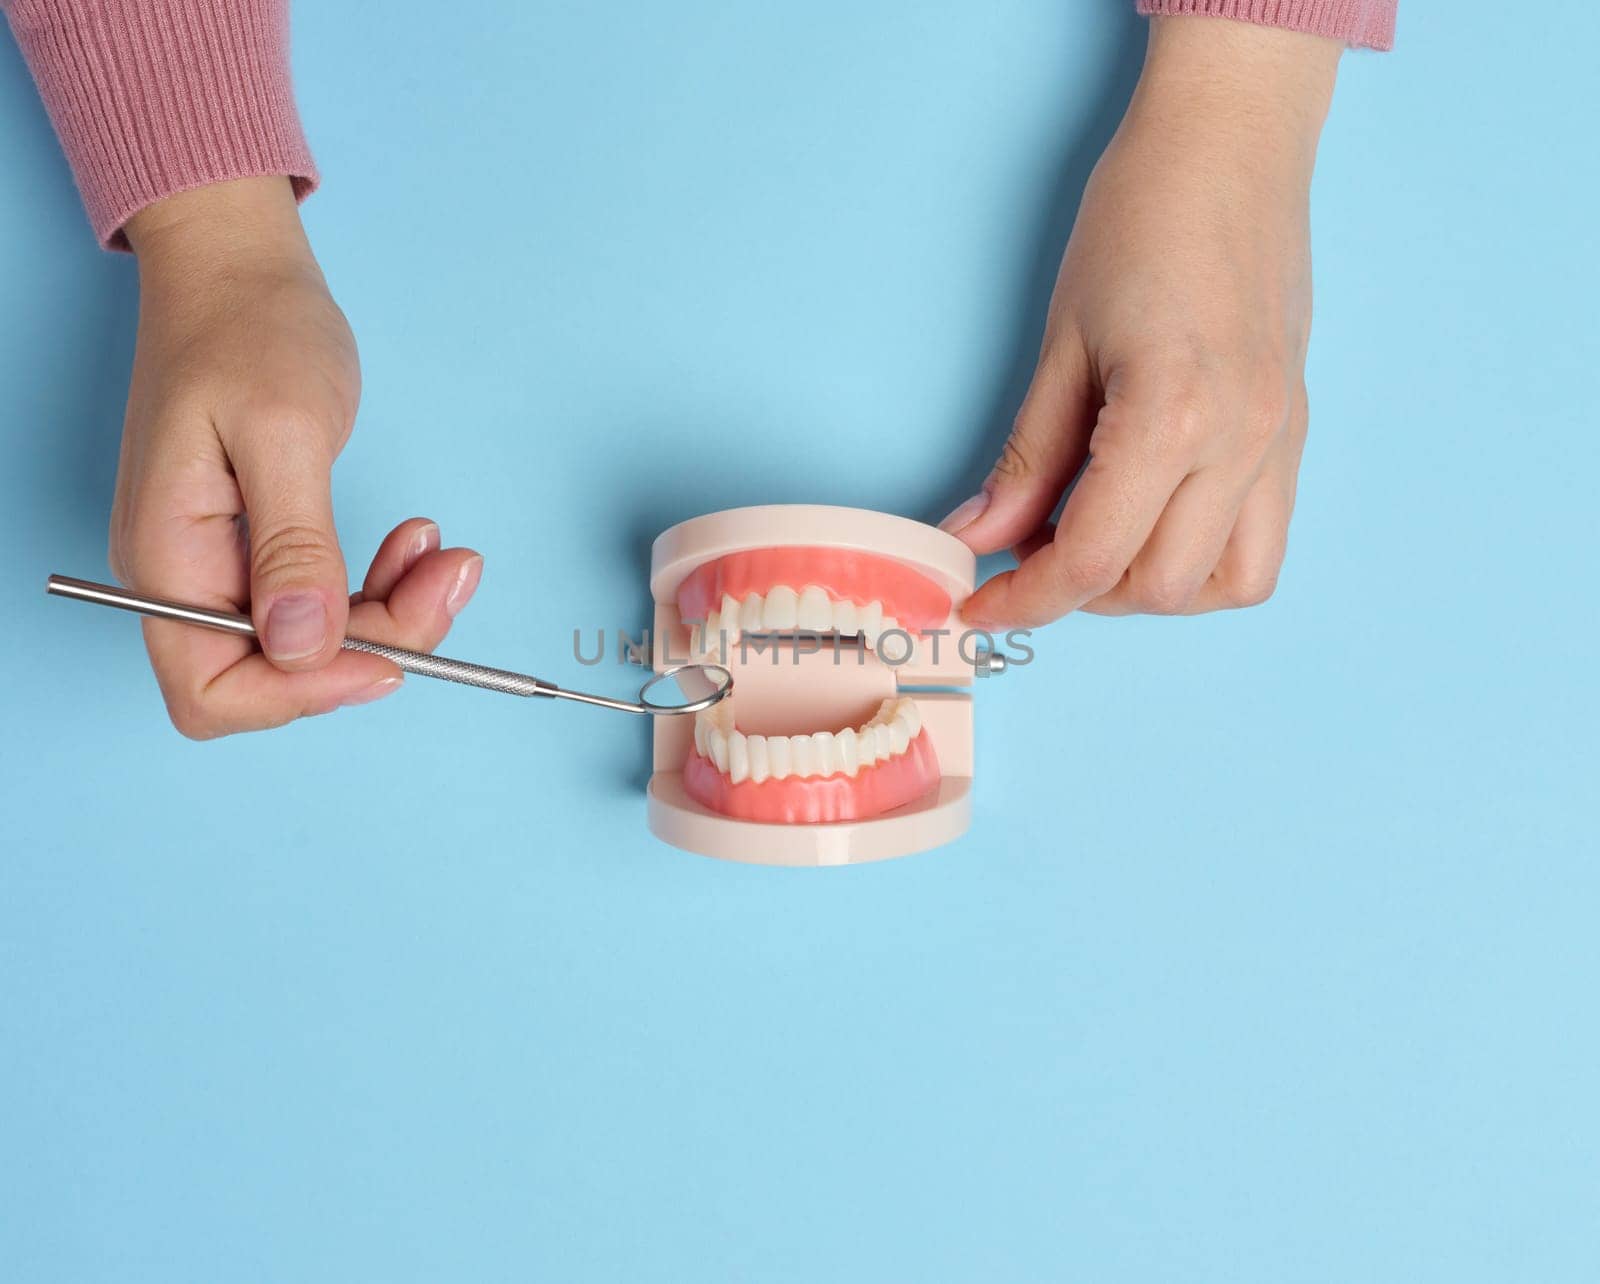 A woman's hand holds a model of a human jaw with white teeth and a medical mirror on a blue background by ndanko